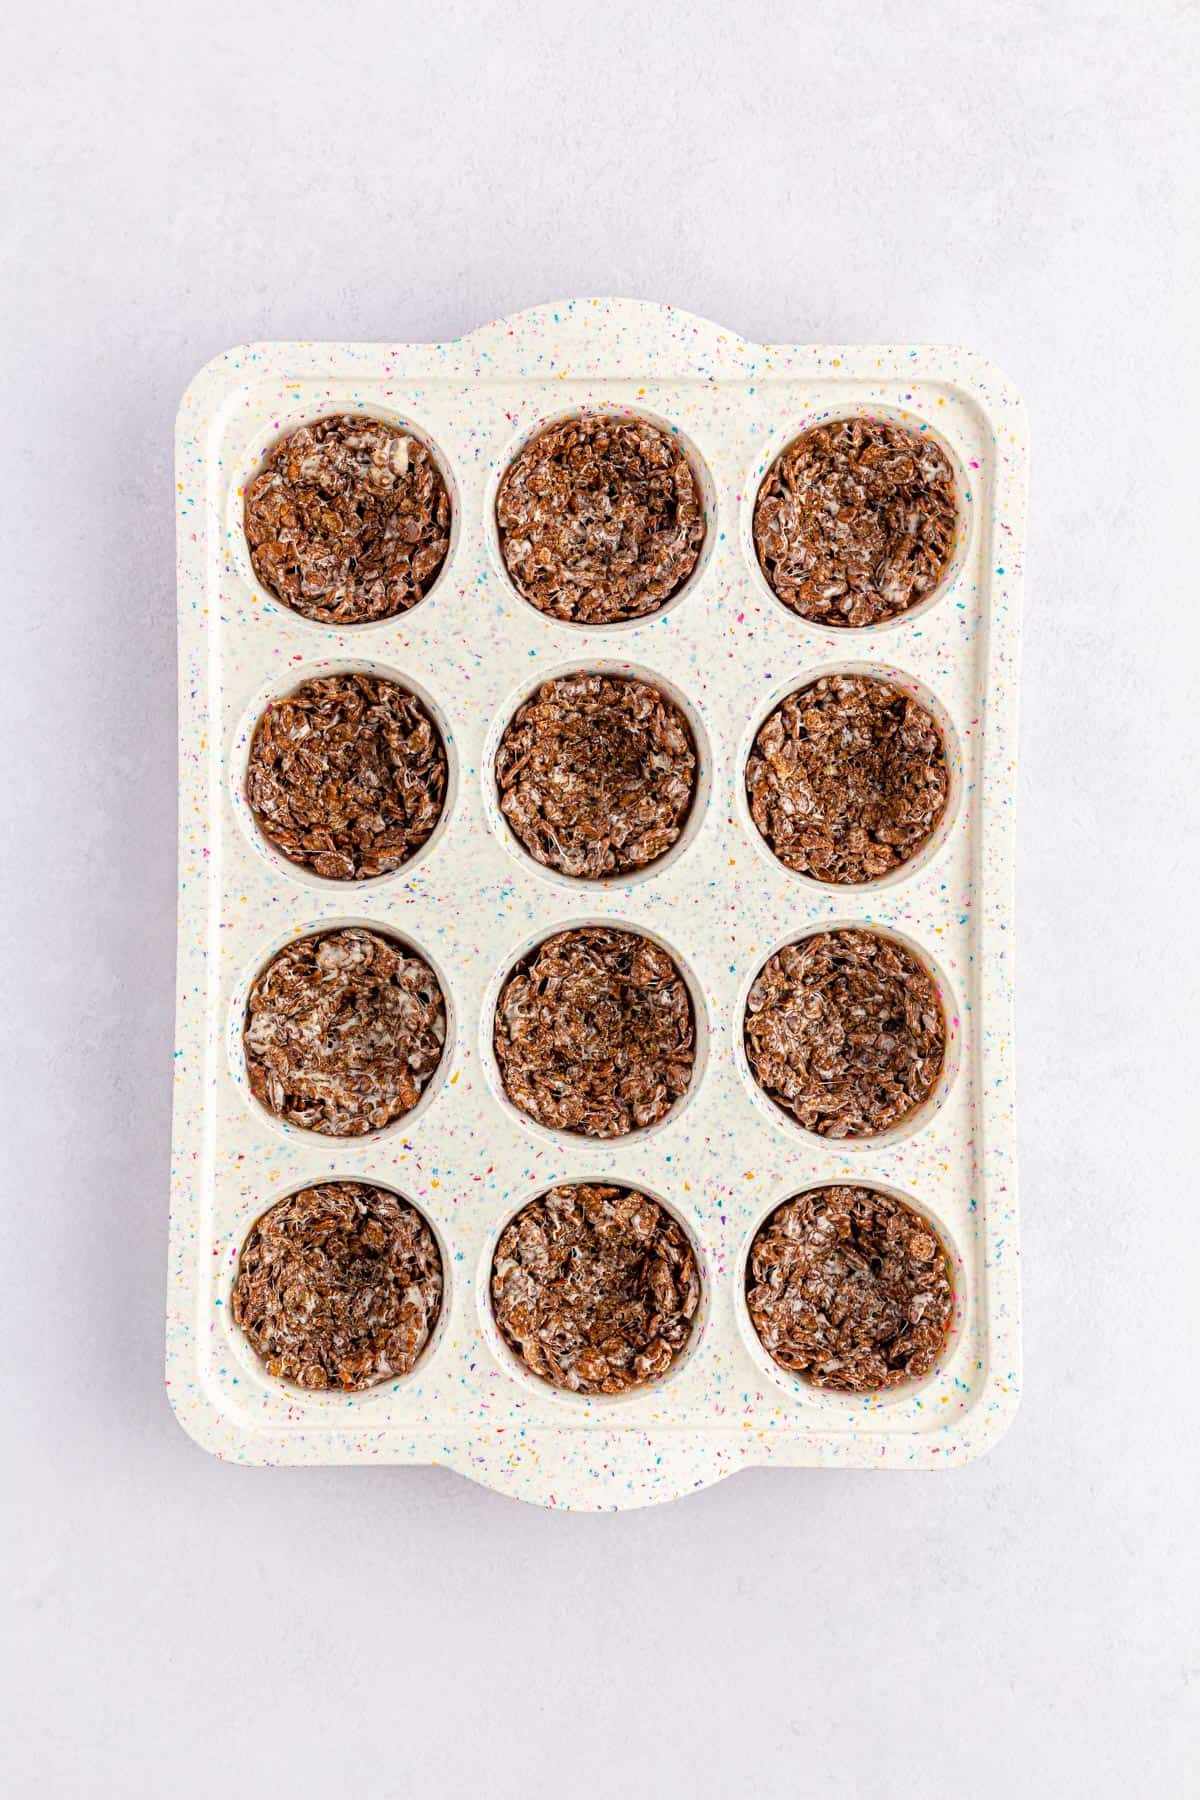 Chocolate Easter nests formed in a muffin pan.